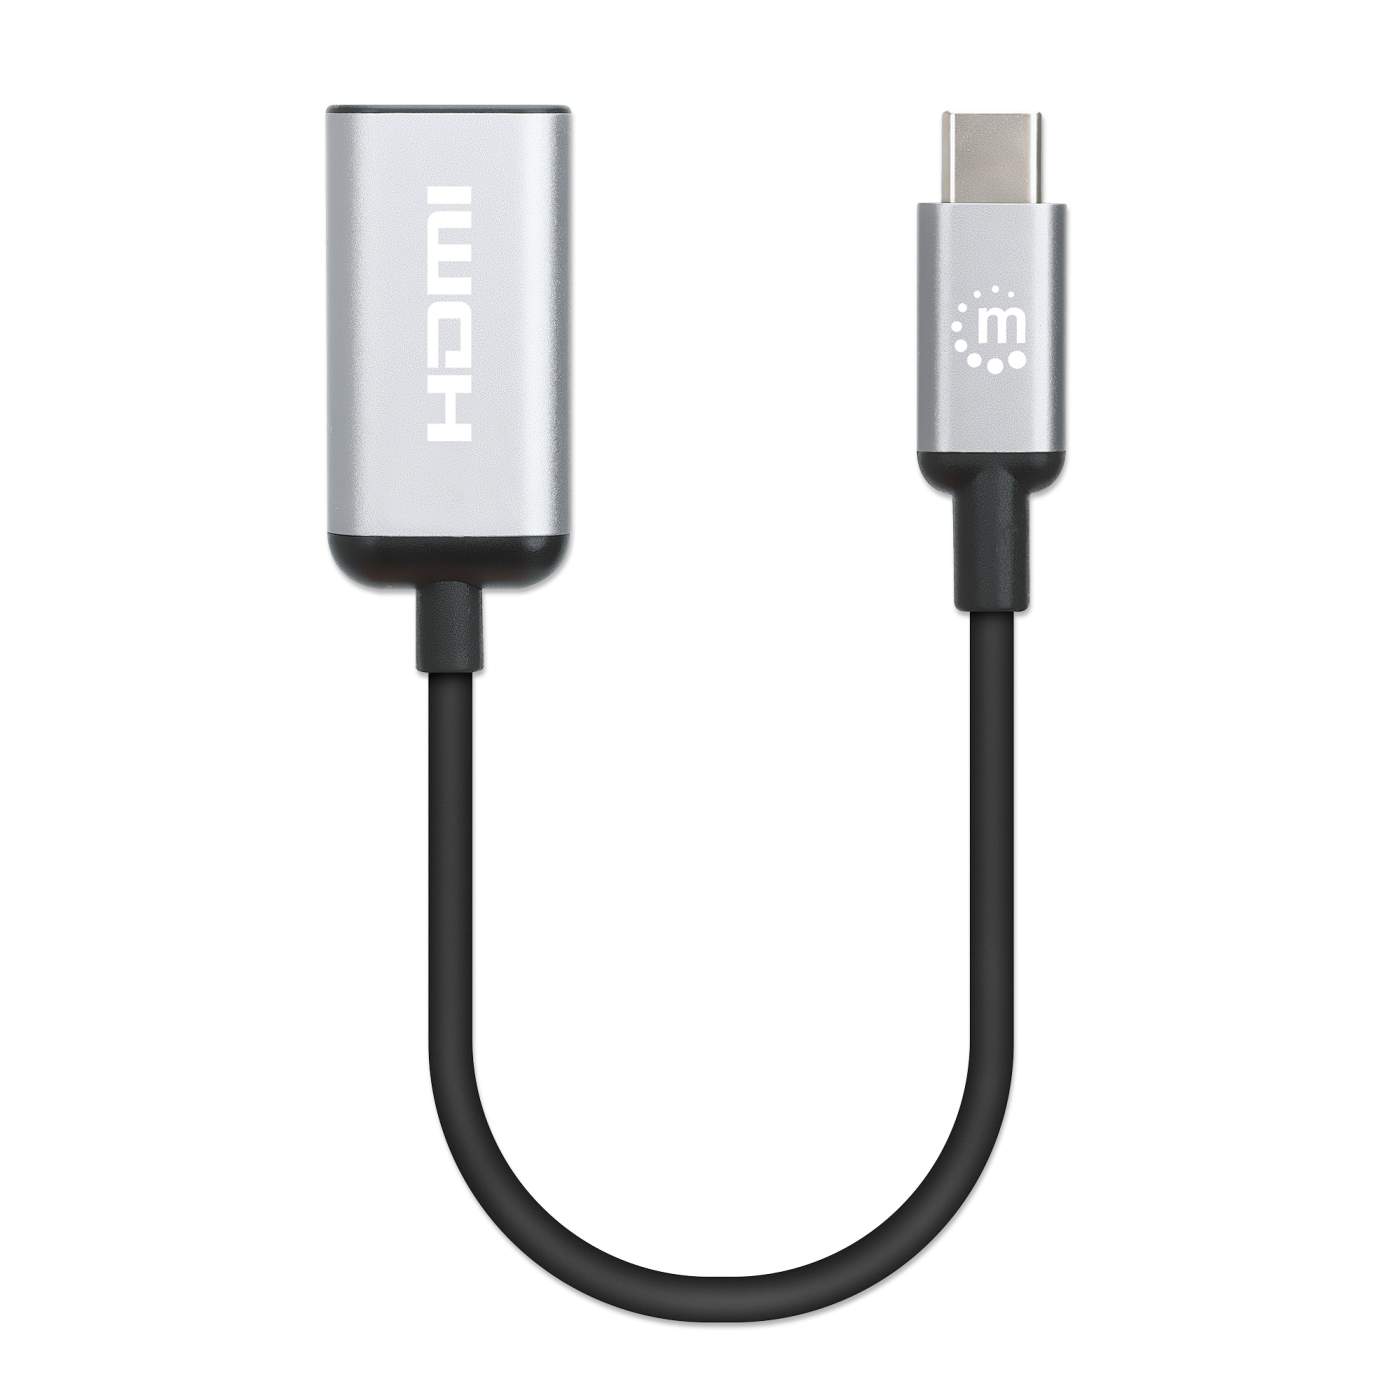 Manhattan 4K@60Hz USB-C to HDMI Adapter Cable (153607)